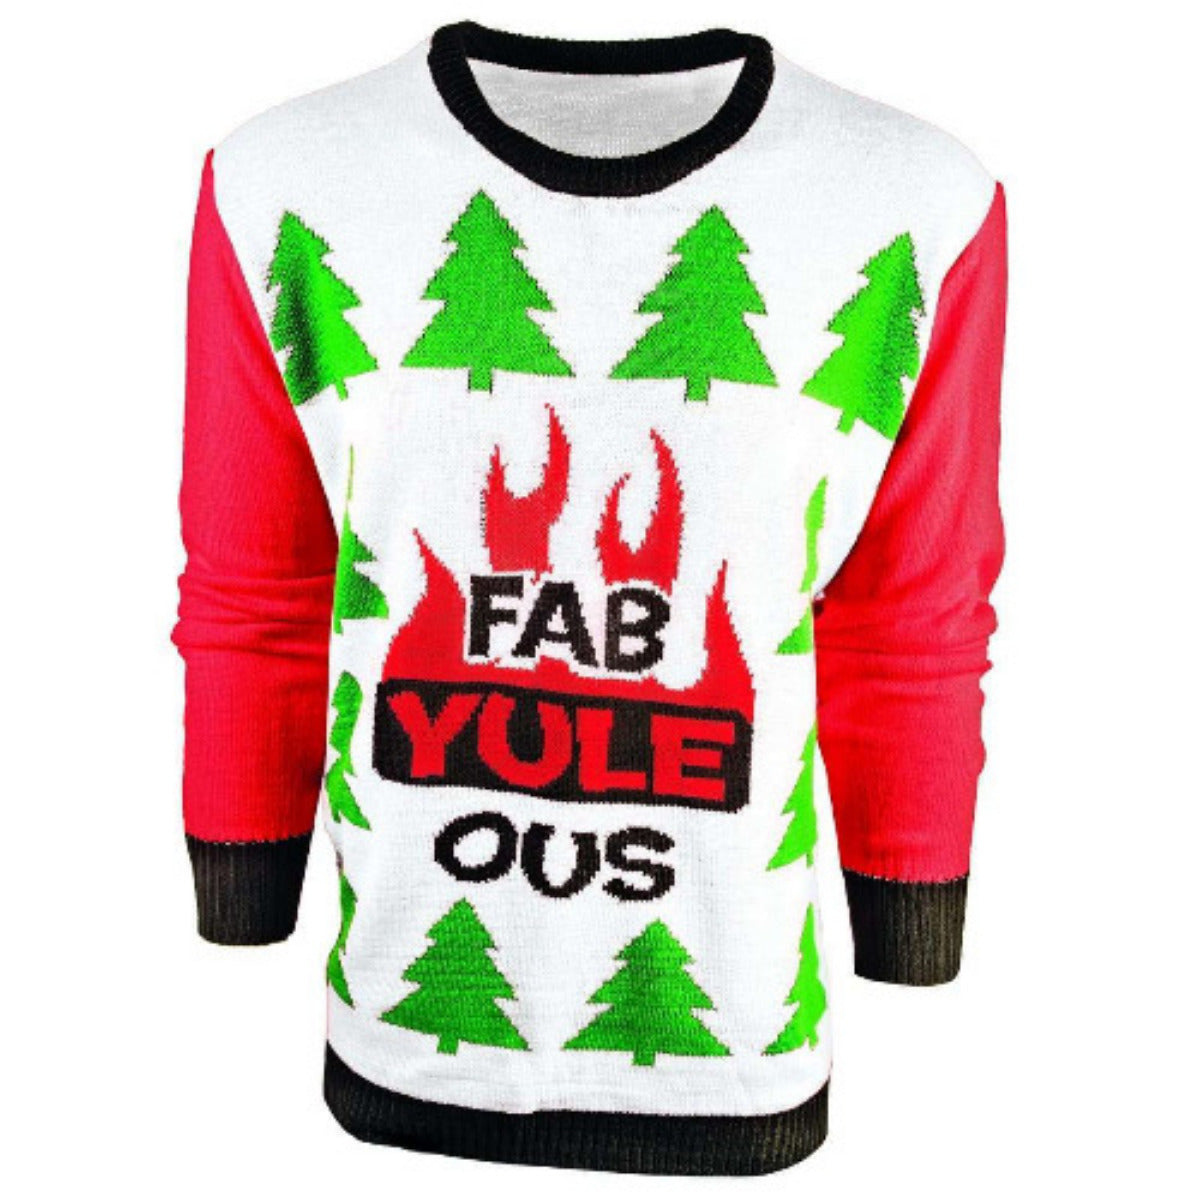 Fab-Yule-Ous Ugly Christmas Sweater